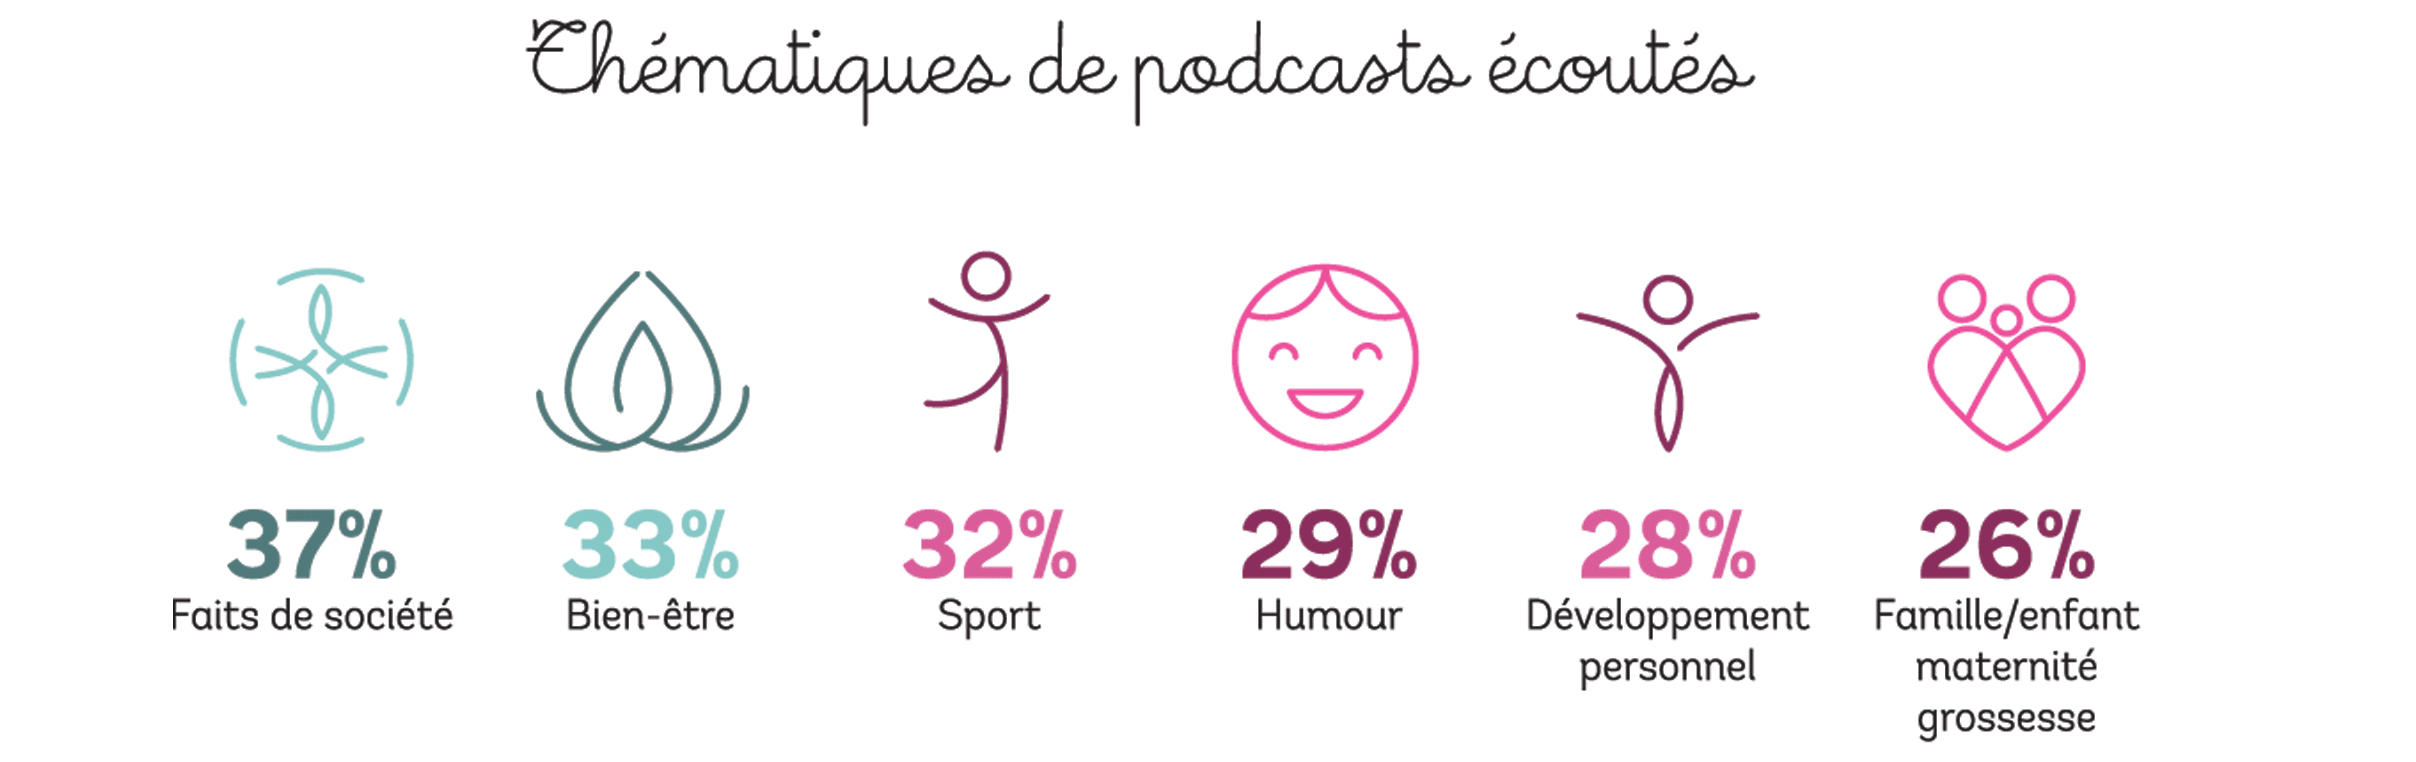 thématiques-ecoutes-podcasts